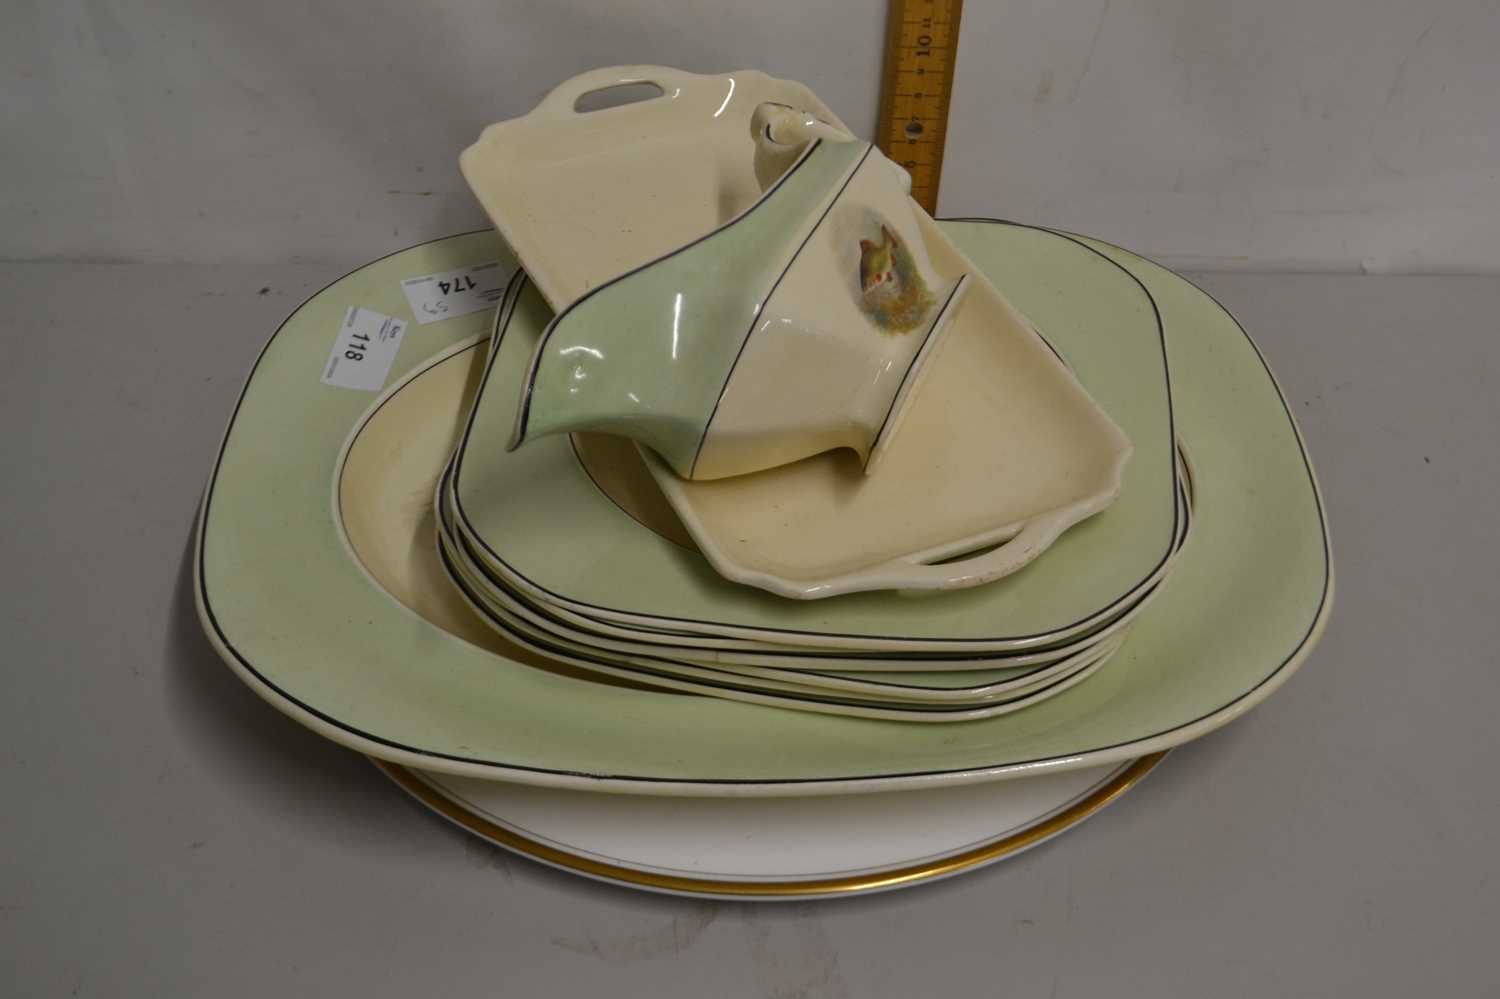 Quantity of Woods Ivory ware dinner plates, gravy boat, meat plate etc, all patterned with fish